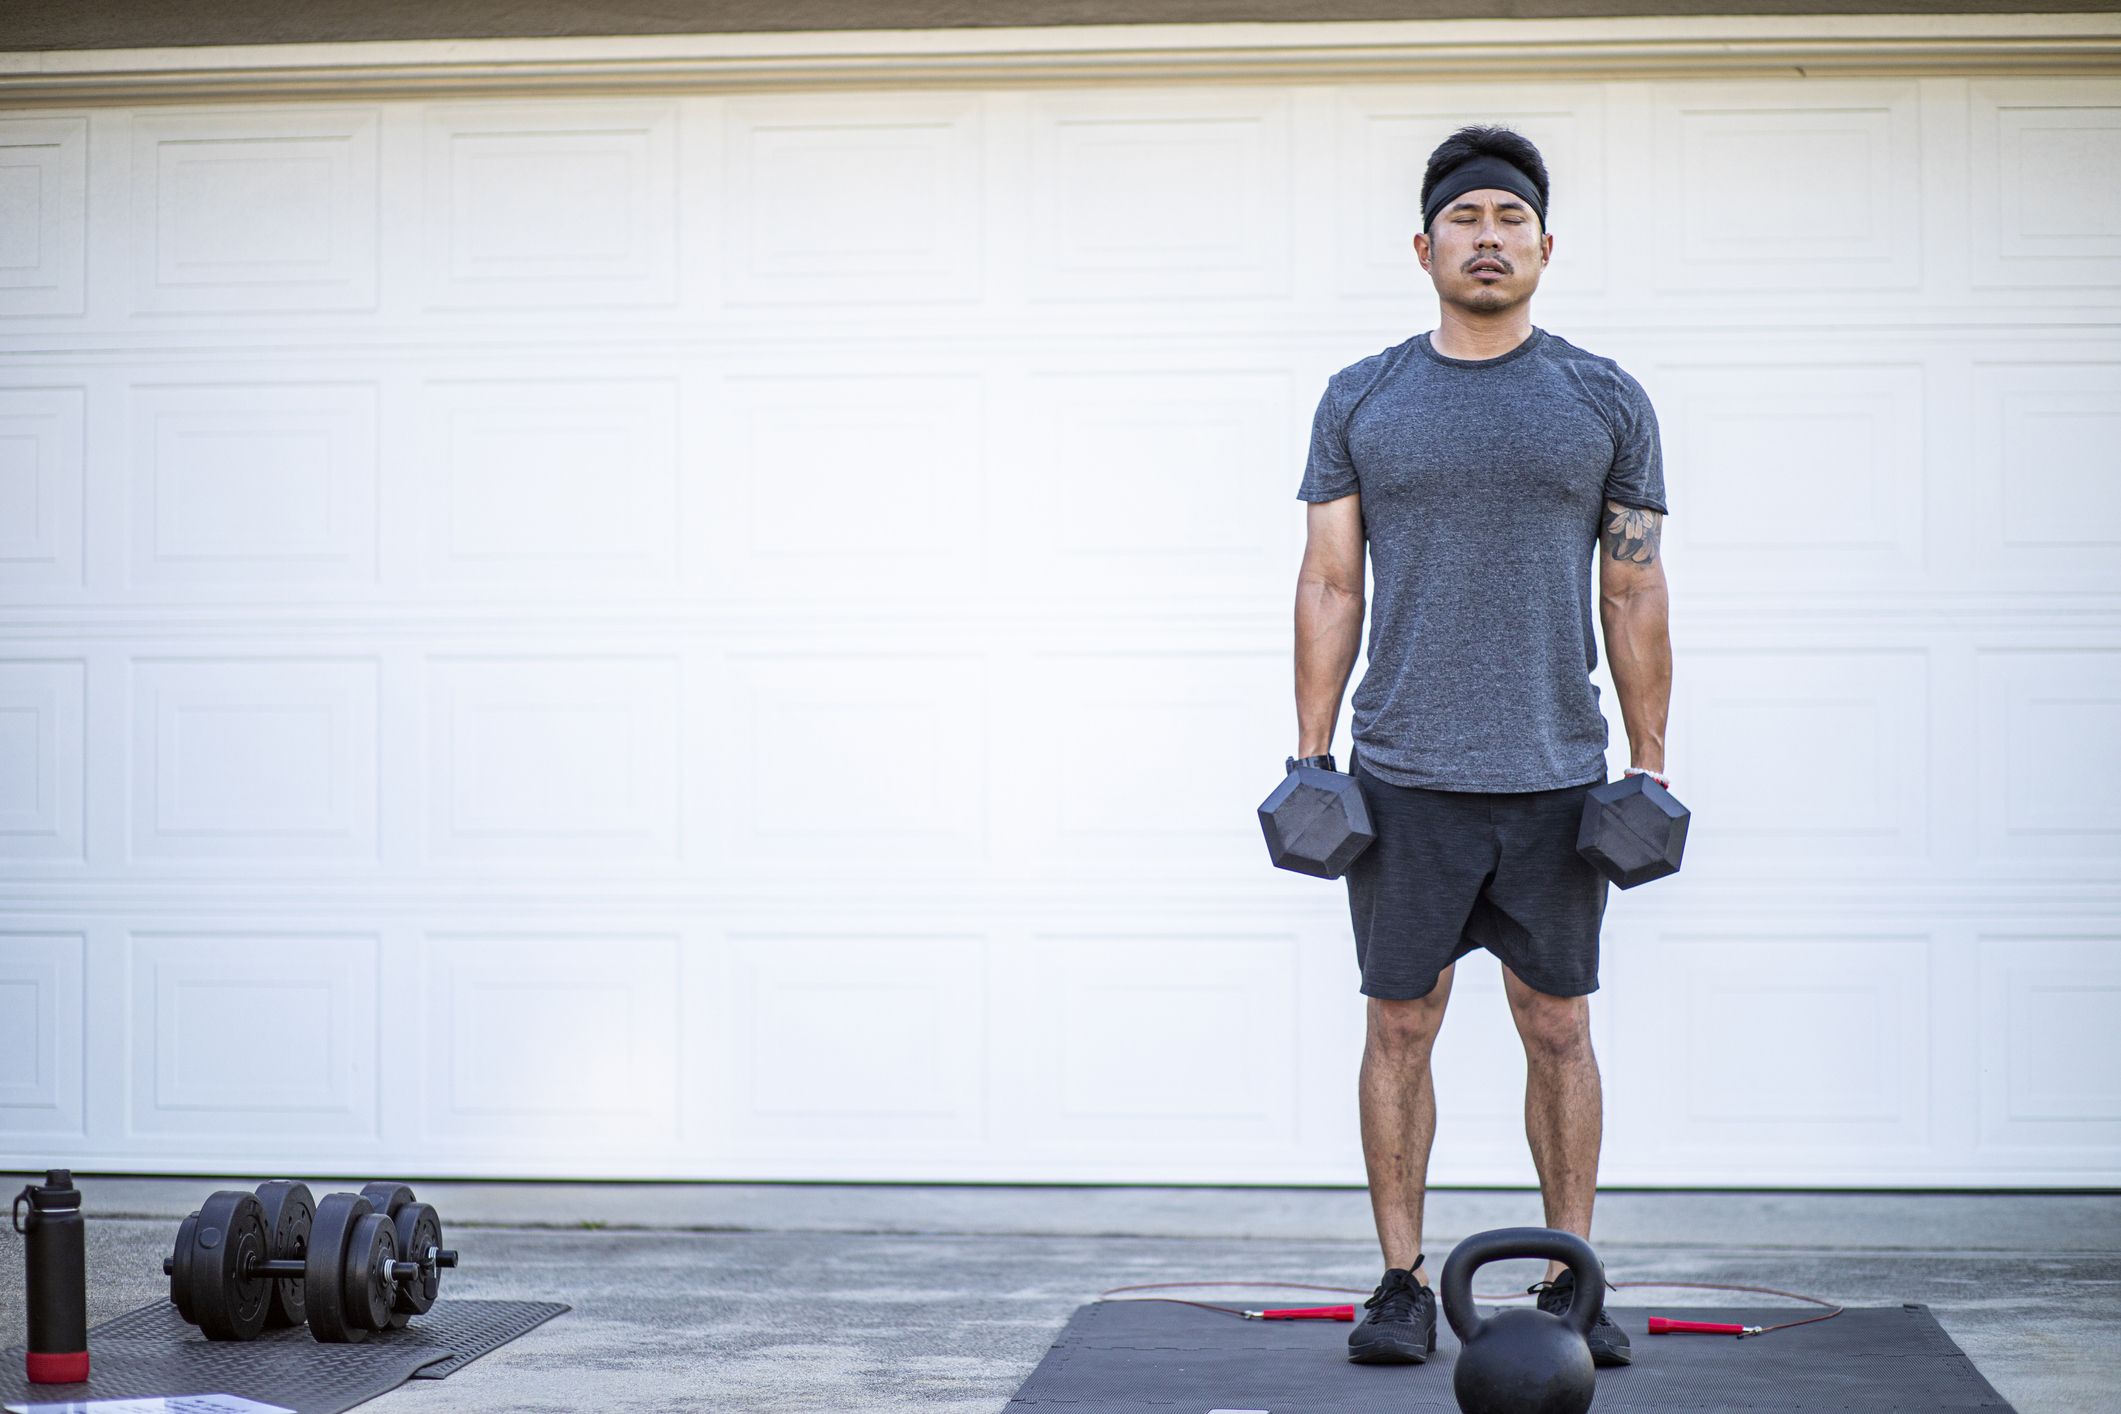 15 CrossFit Workouts You Can Do At Home with Limited Equipment